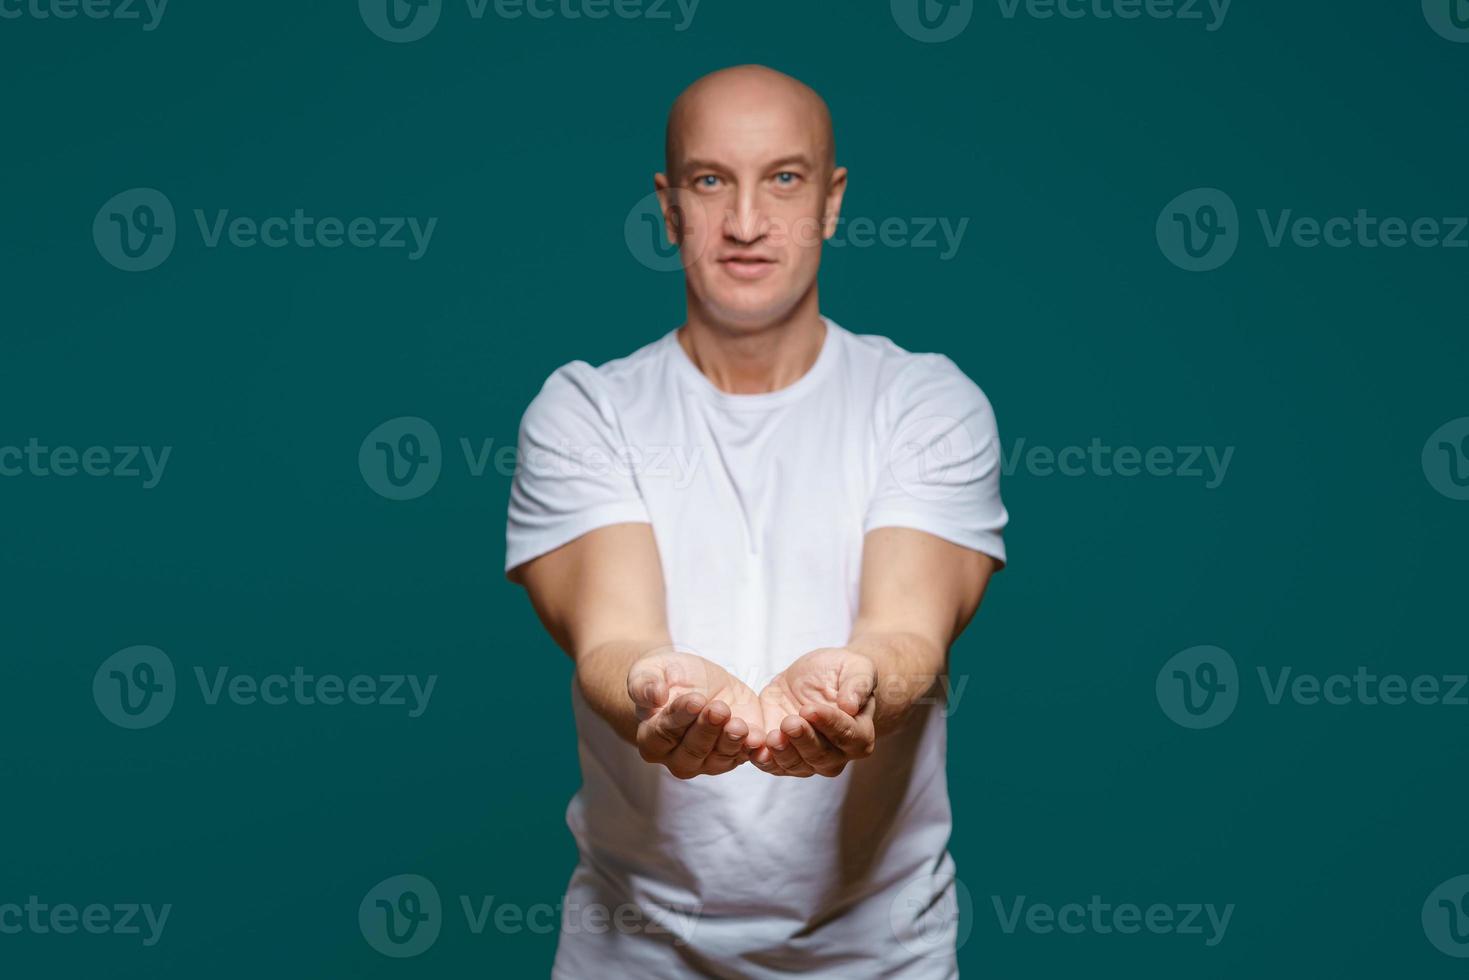 The bald man smiles and holds his hands in front of him, palms up, against a blue background photo